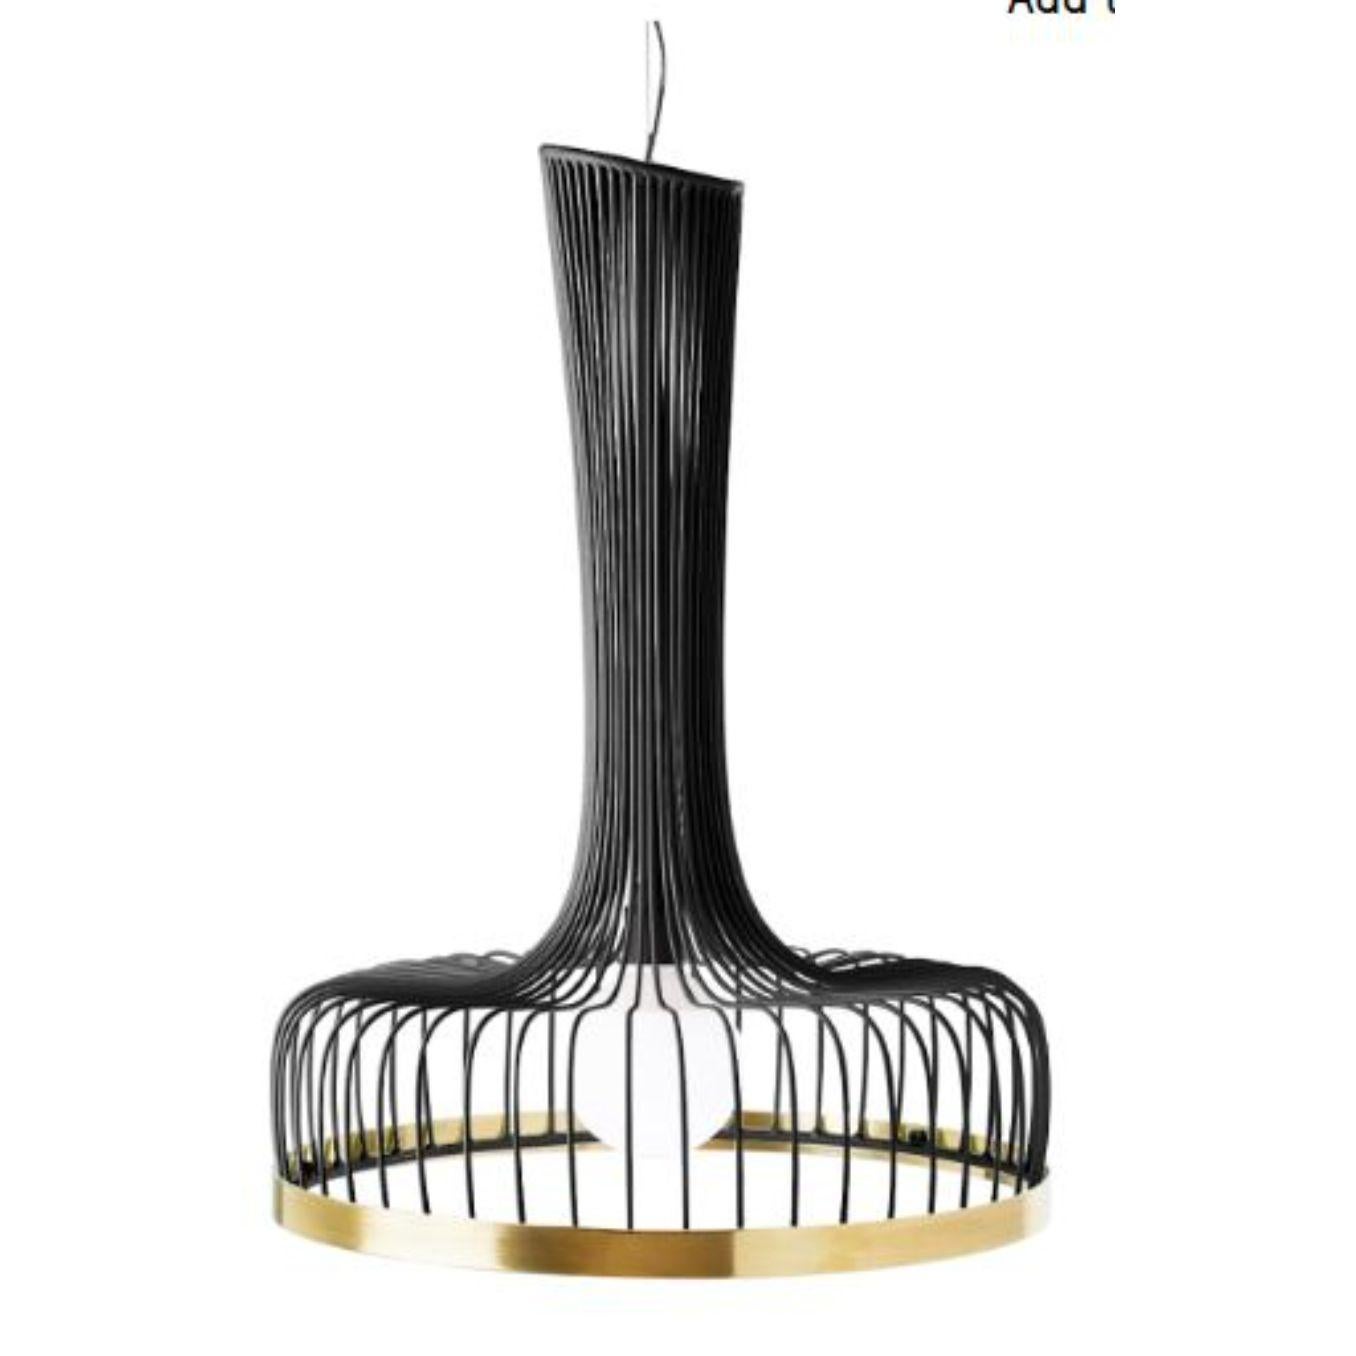 Black new spider I suspension lamp with brass ring by Dooq
Dimensions: W 52 x D 52 x H 70 cm
Materials: lacquered metal, polished or brushed metal, brass.
Also available in different colors and materials. 

Information:
230V/50Hz
E27/1x20W